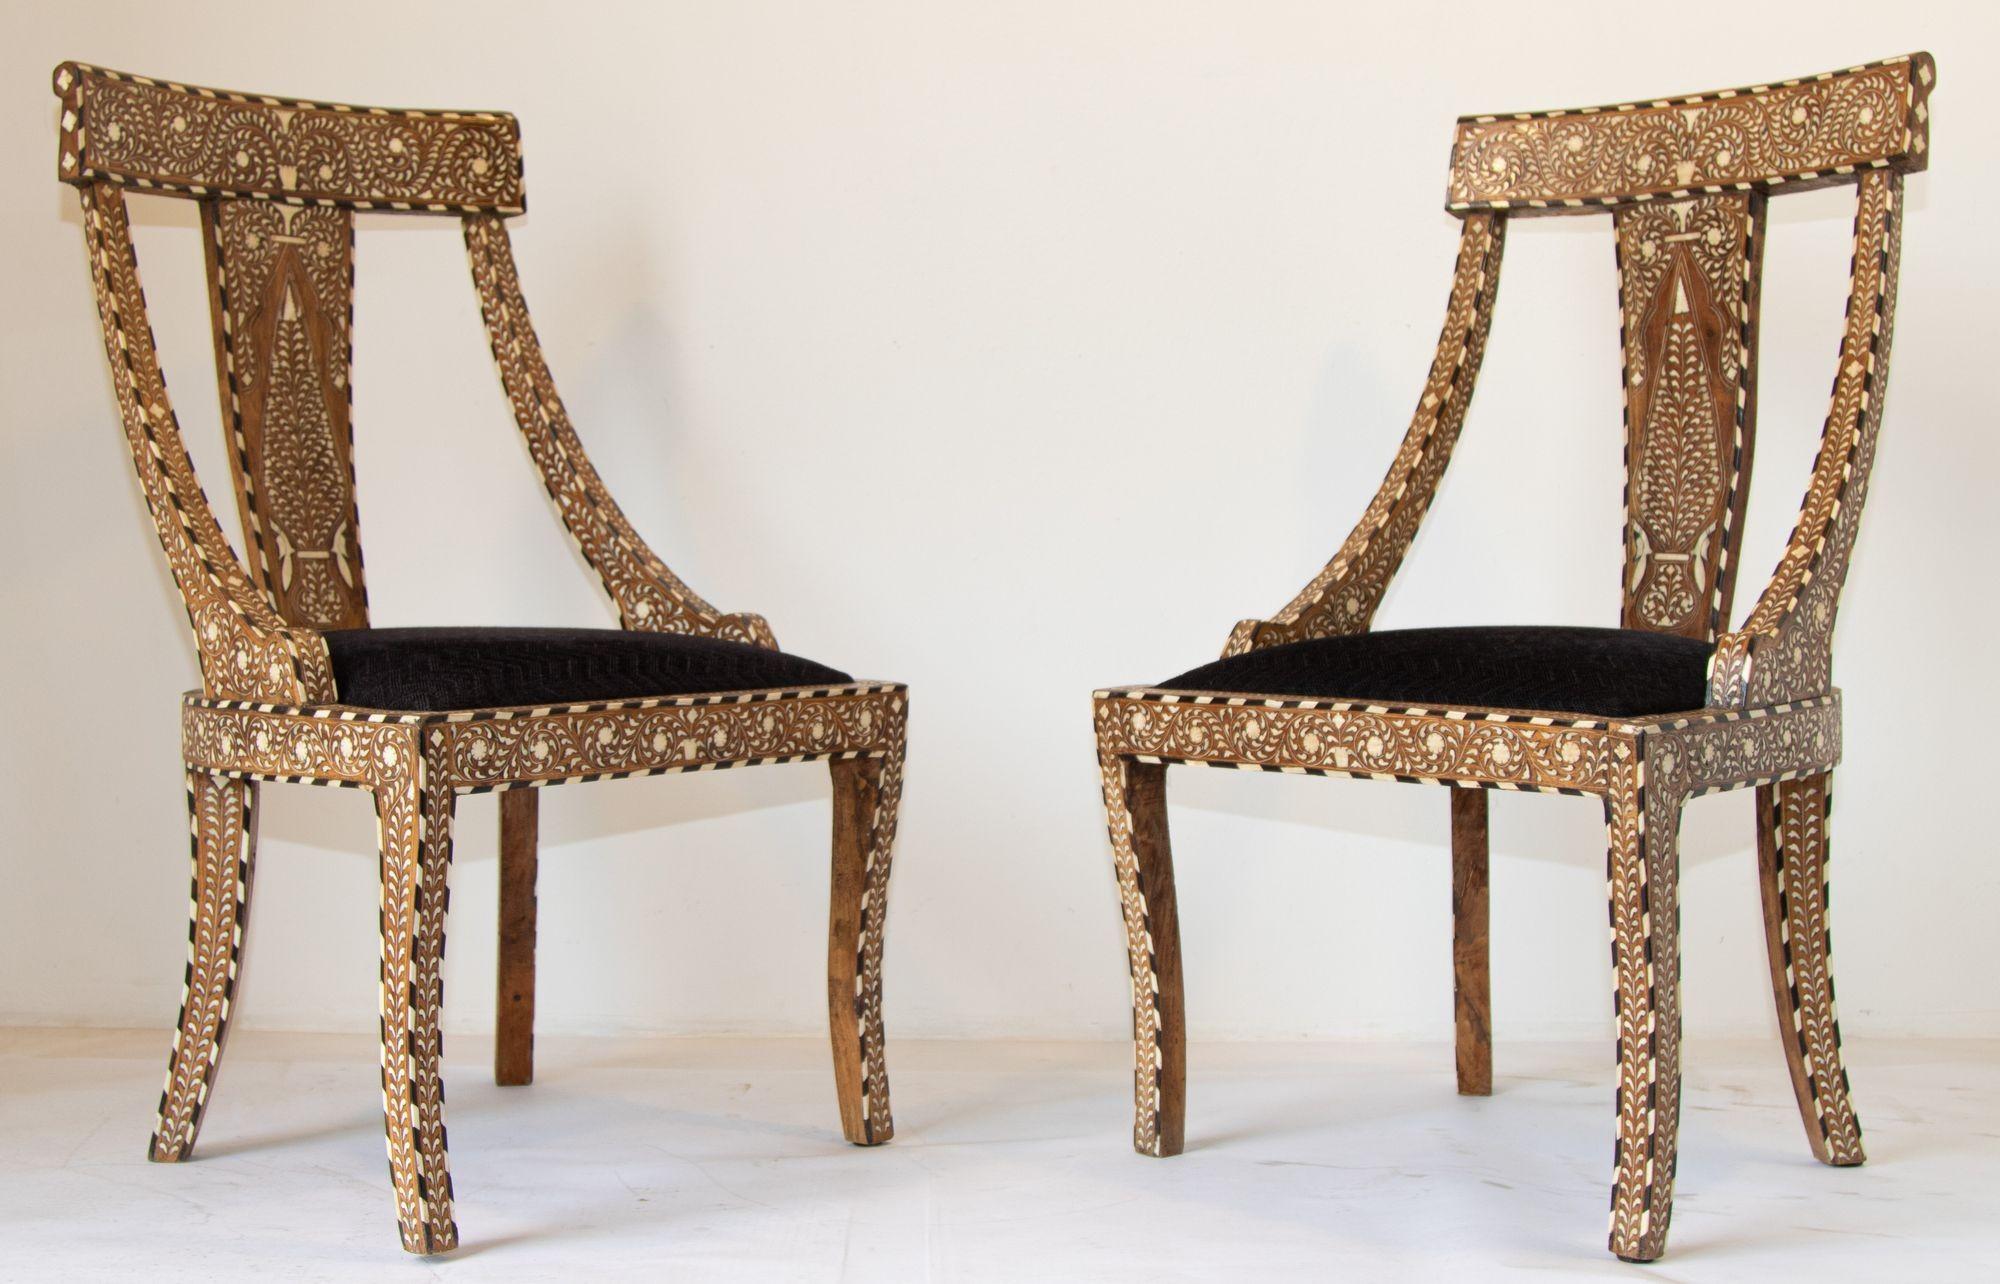 Antique Anglo Indian sheesham wood chairs with bone inlay floral pattern throughout.
Beautiful sheesham wood side chairs or dining chairs with bone inlays, handmade in India.
Bone inlay is an ancient decorative technique that involves embedding